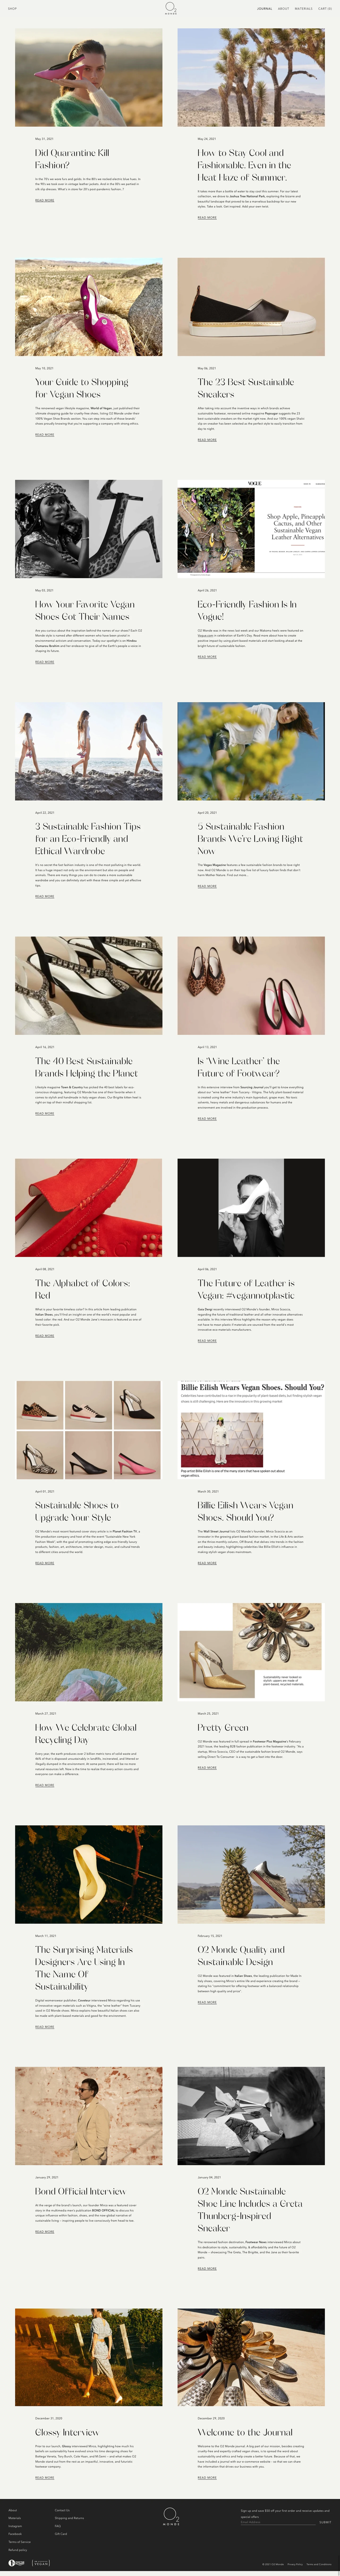 O2 Monde Landing Page Example: O2 Monde offers you the Eco Friendly and plant based women's shoes in timeless designs. We have the wide collection of handcrafted sustainable and luxury vegan women's dress shoes available online in USA.